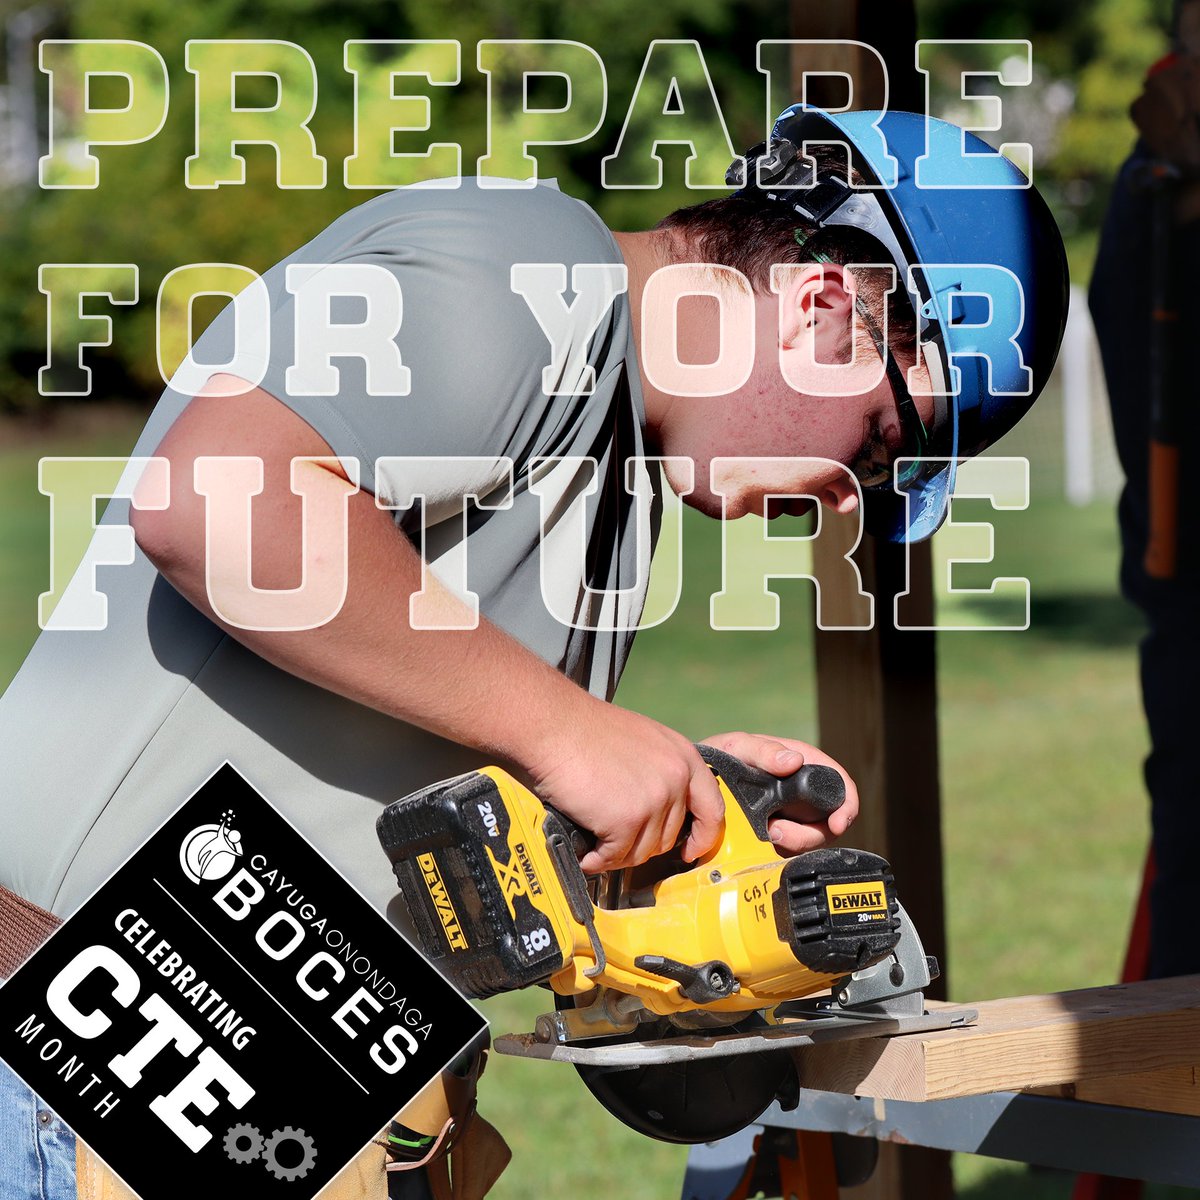 Sign up for a CTE program to prepare for your future! This year, Construction & Building Trades students have worked at Tyburn Academy. From measuring to framing, students are preparing for future careers in Construction! To learn more, visit: cayboces.org/Page/150 #CTEMonth